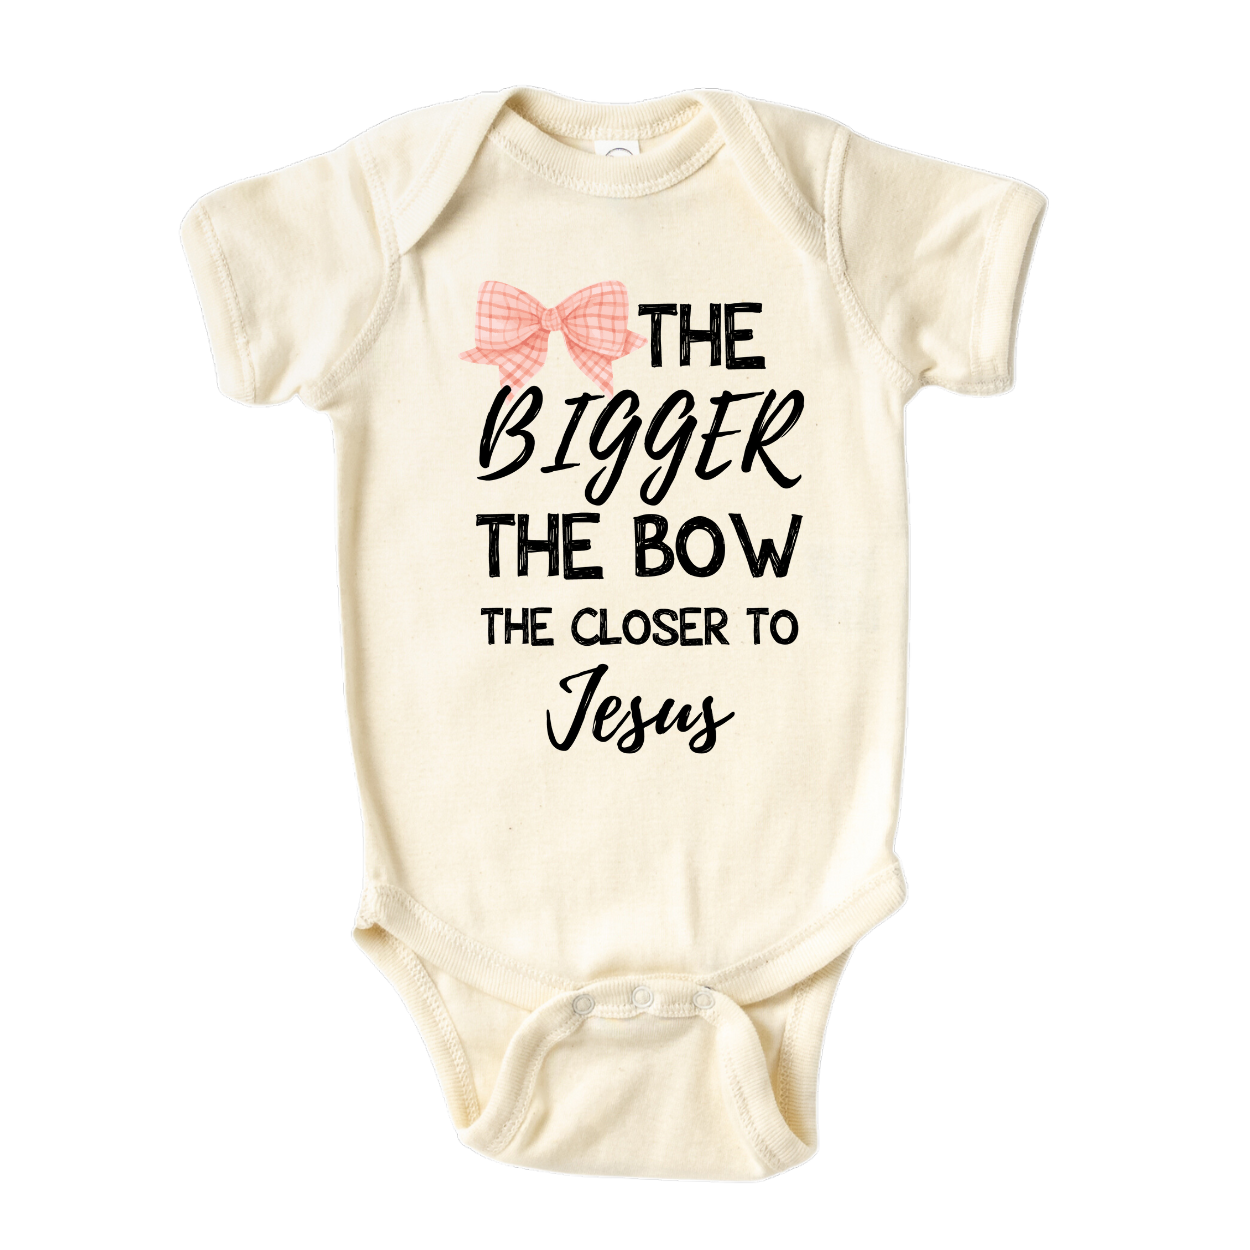 The Bigger The Bow The Closer to Jesus Baby Onesie® Kids Shirt